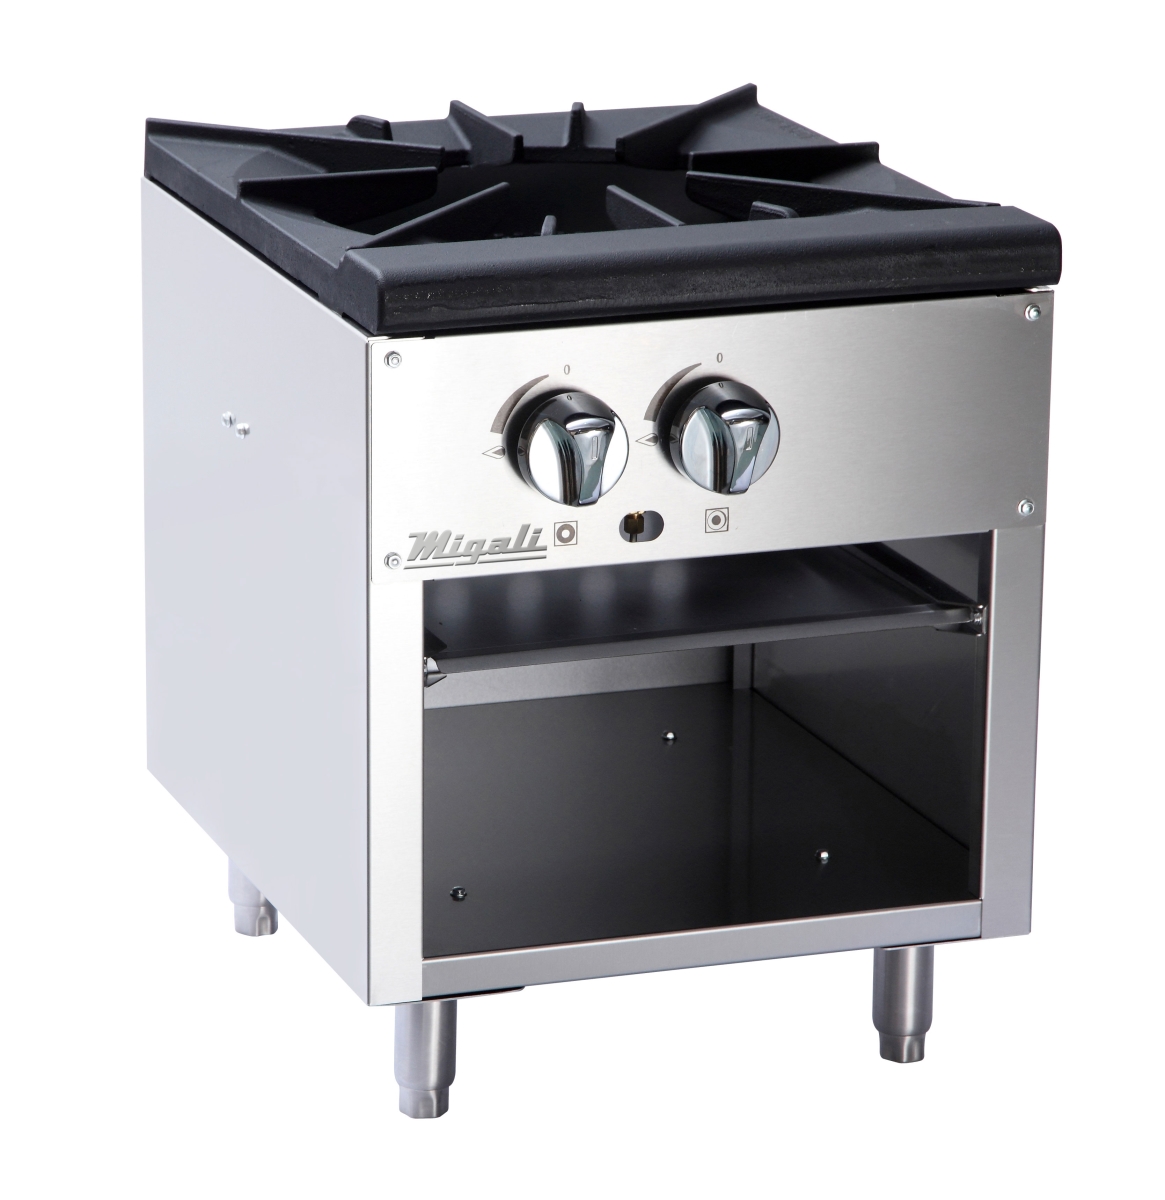 C-sps-1-18 18 In. 40000 Btu Competitor Series 1 Burner Stock Pot Stove, Stainless Steel